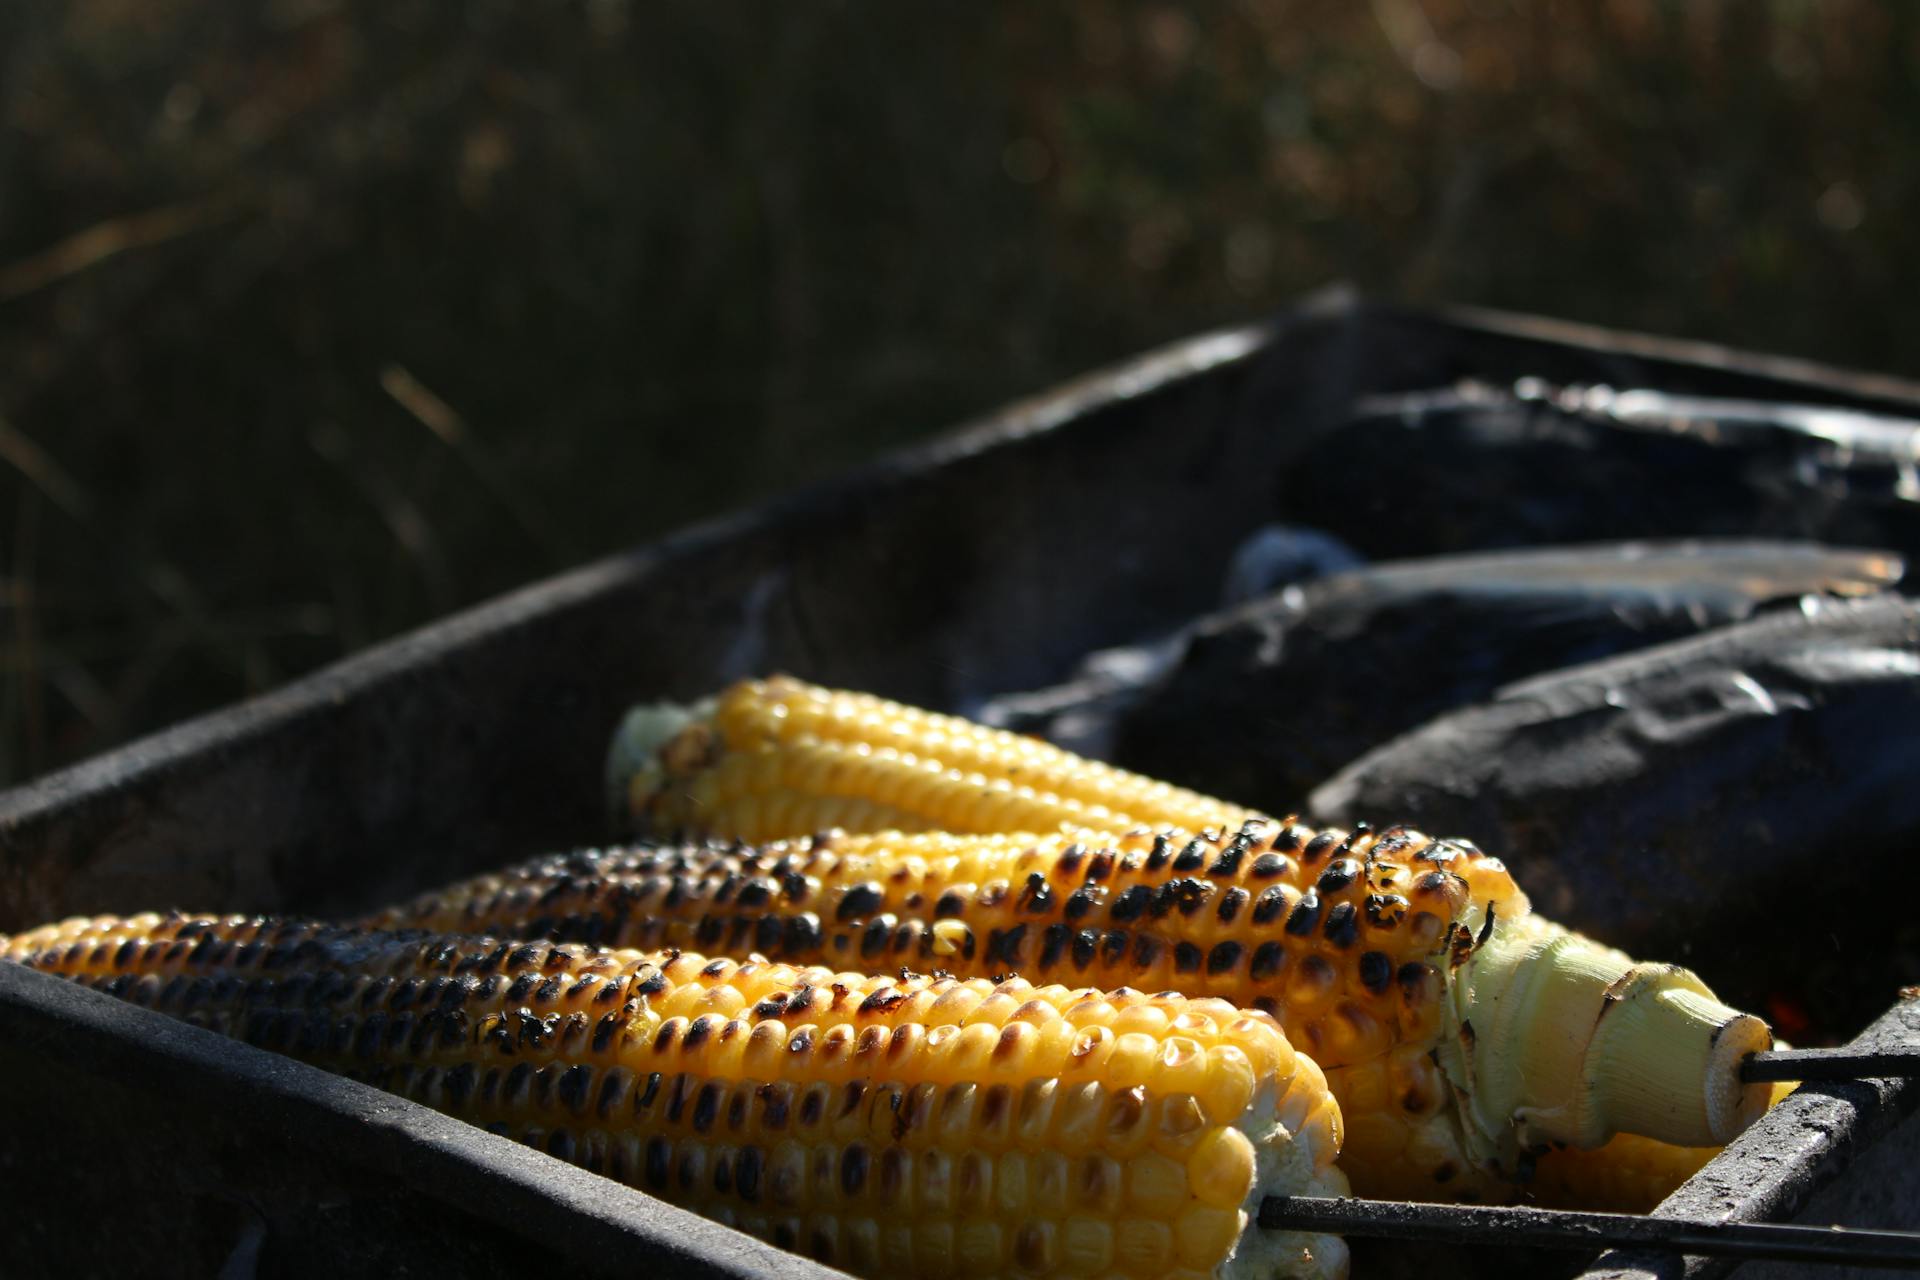 Grilled Corn on Black Charcoal Grill